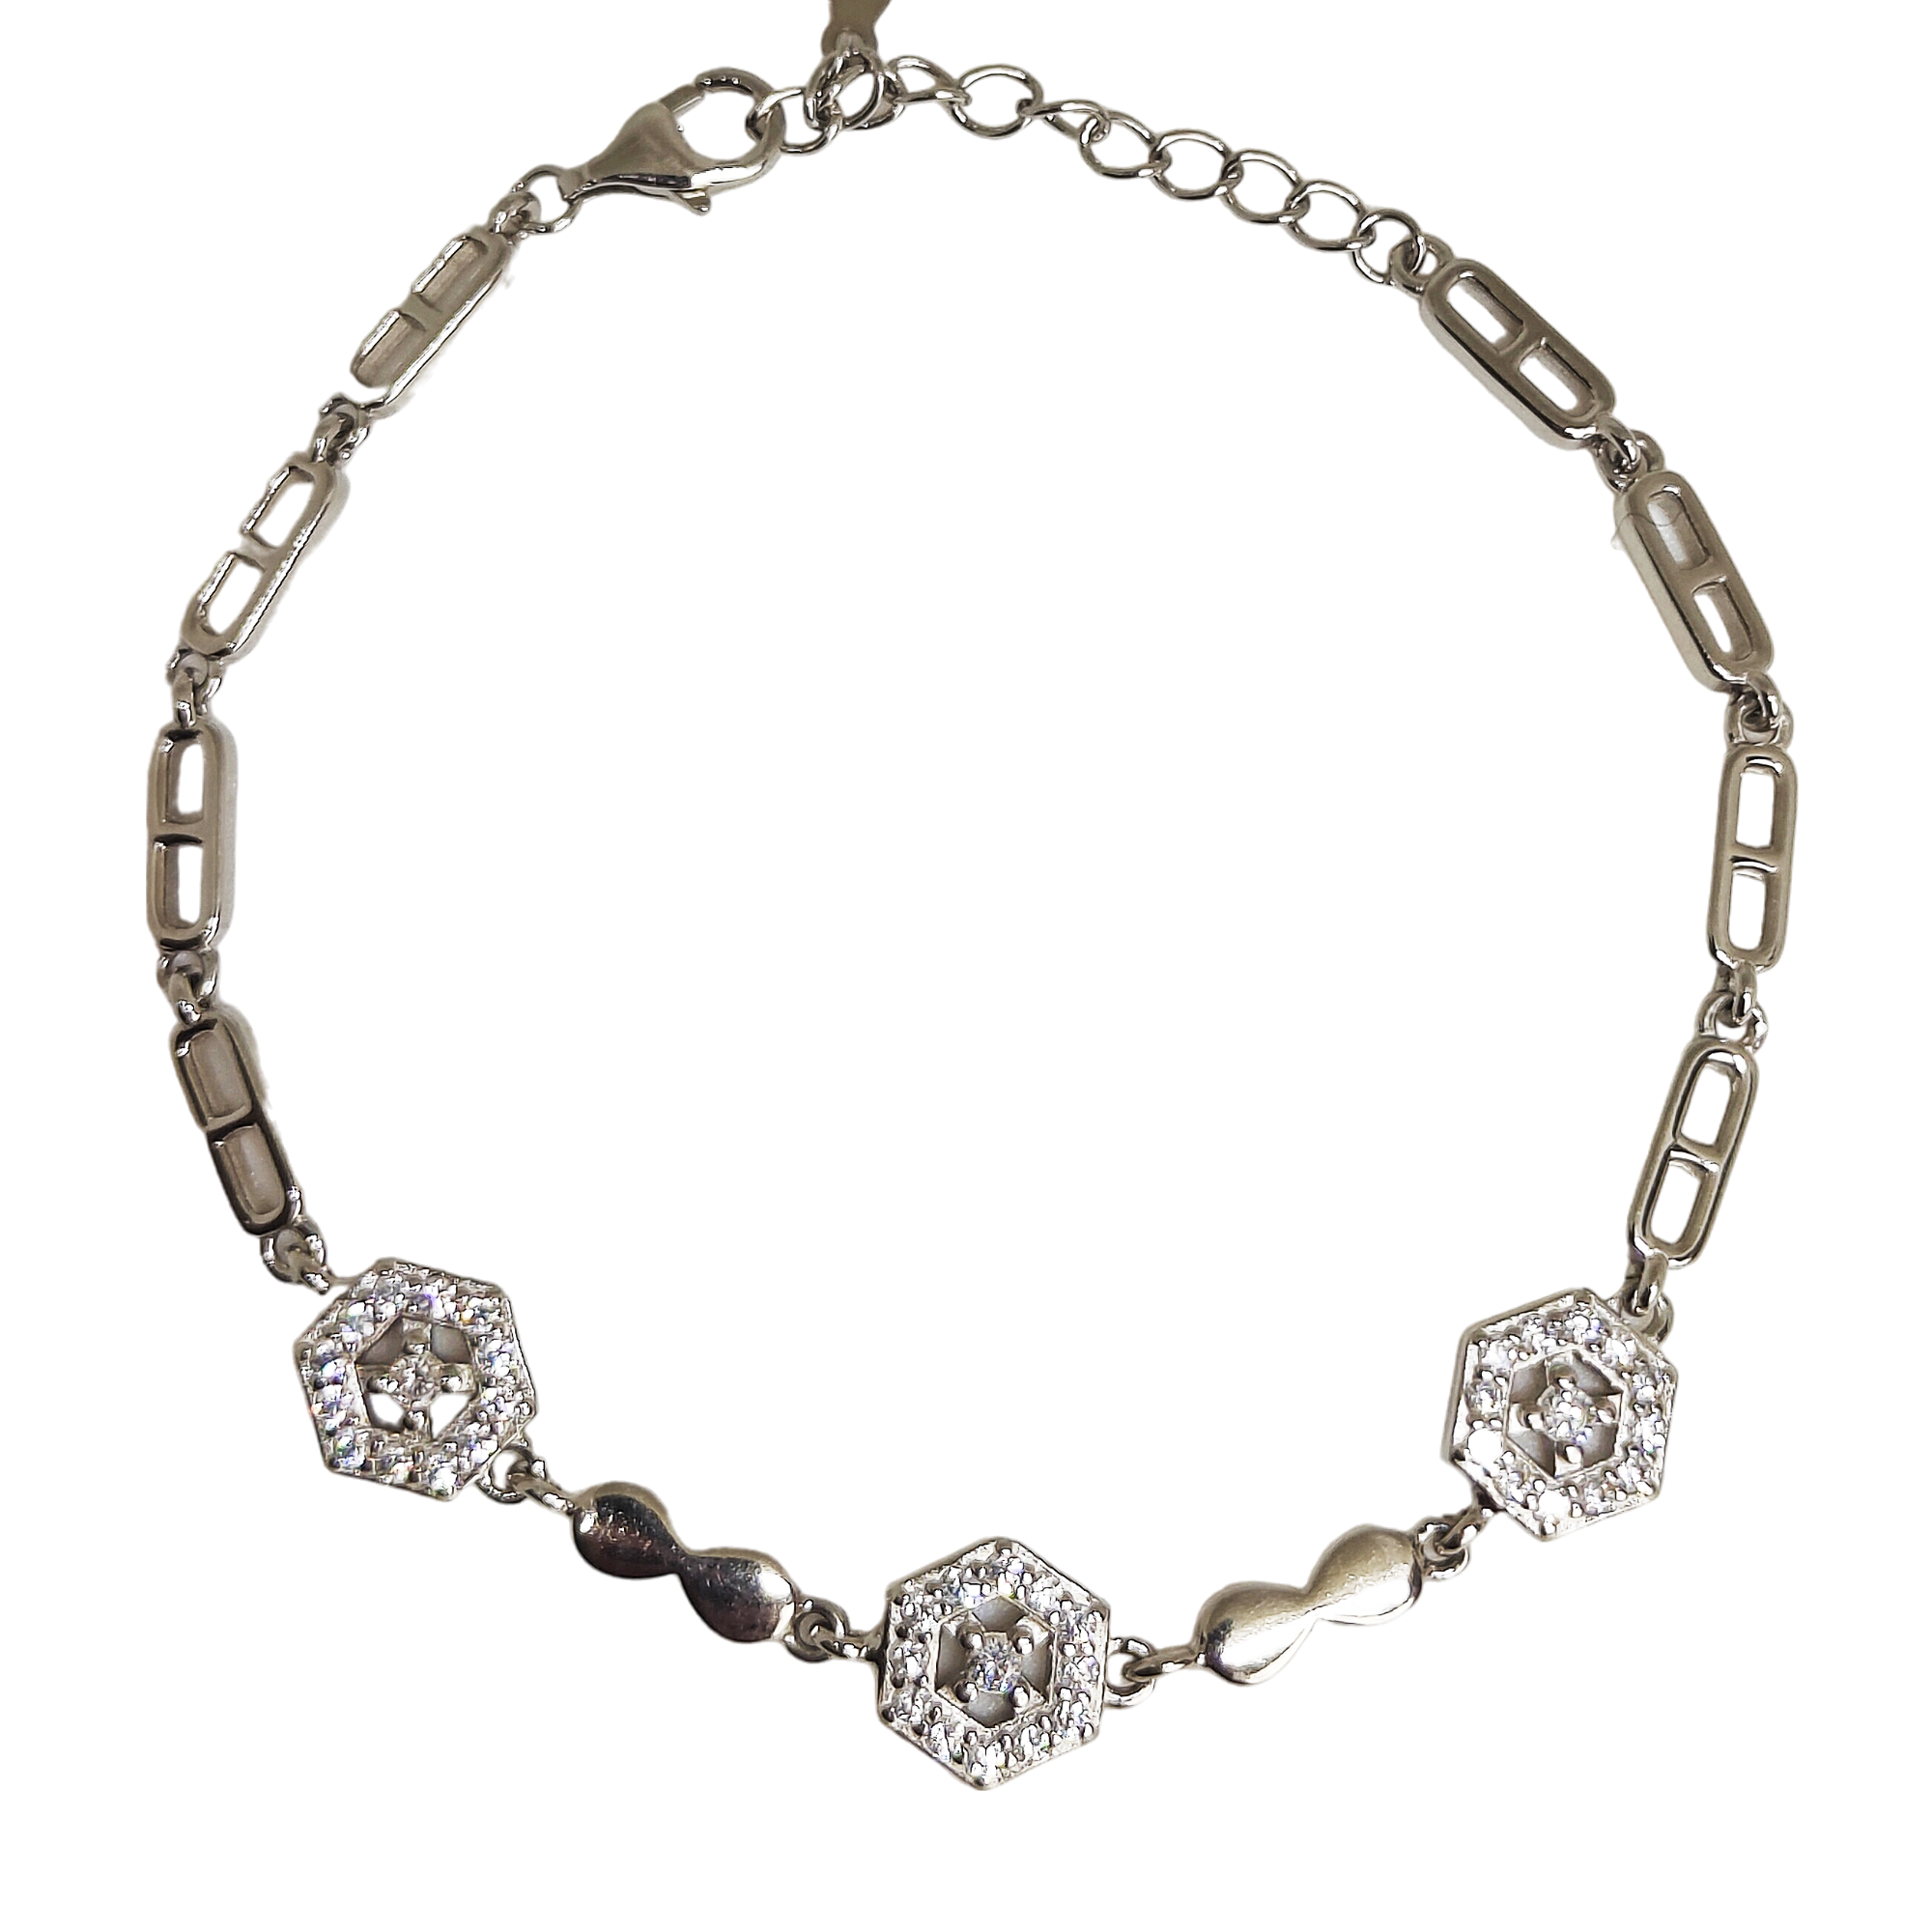 Hexagon Bracelet With engraved Diamonds Made in Sterling Silver - Rivansh